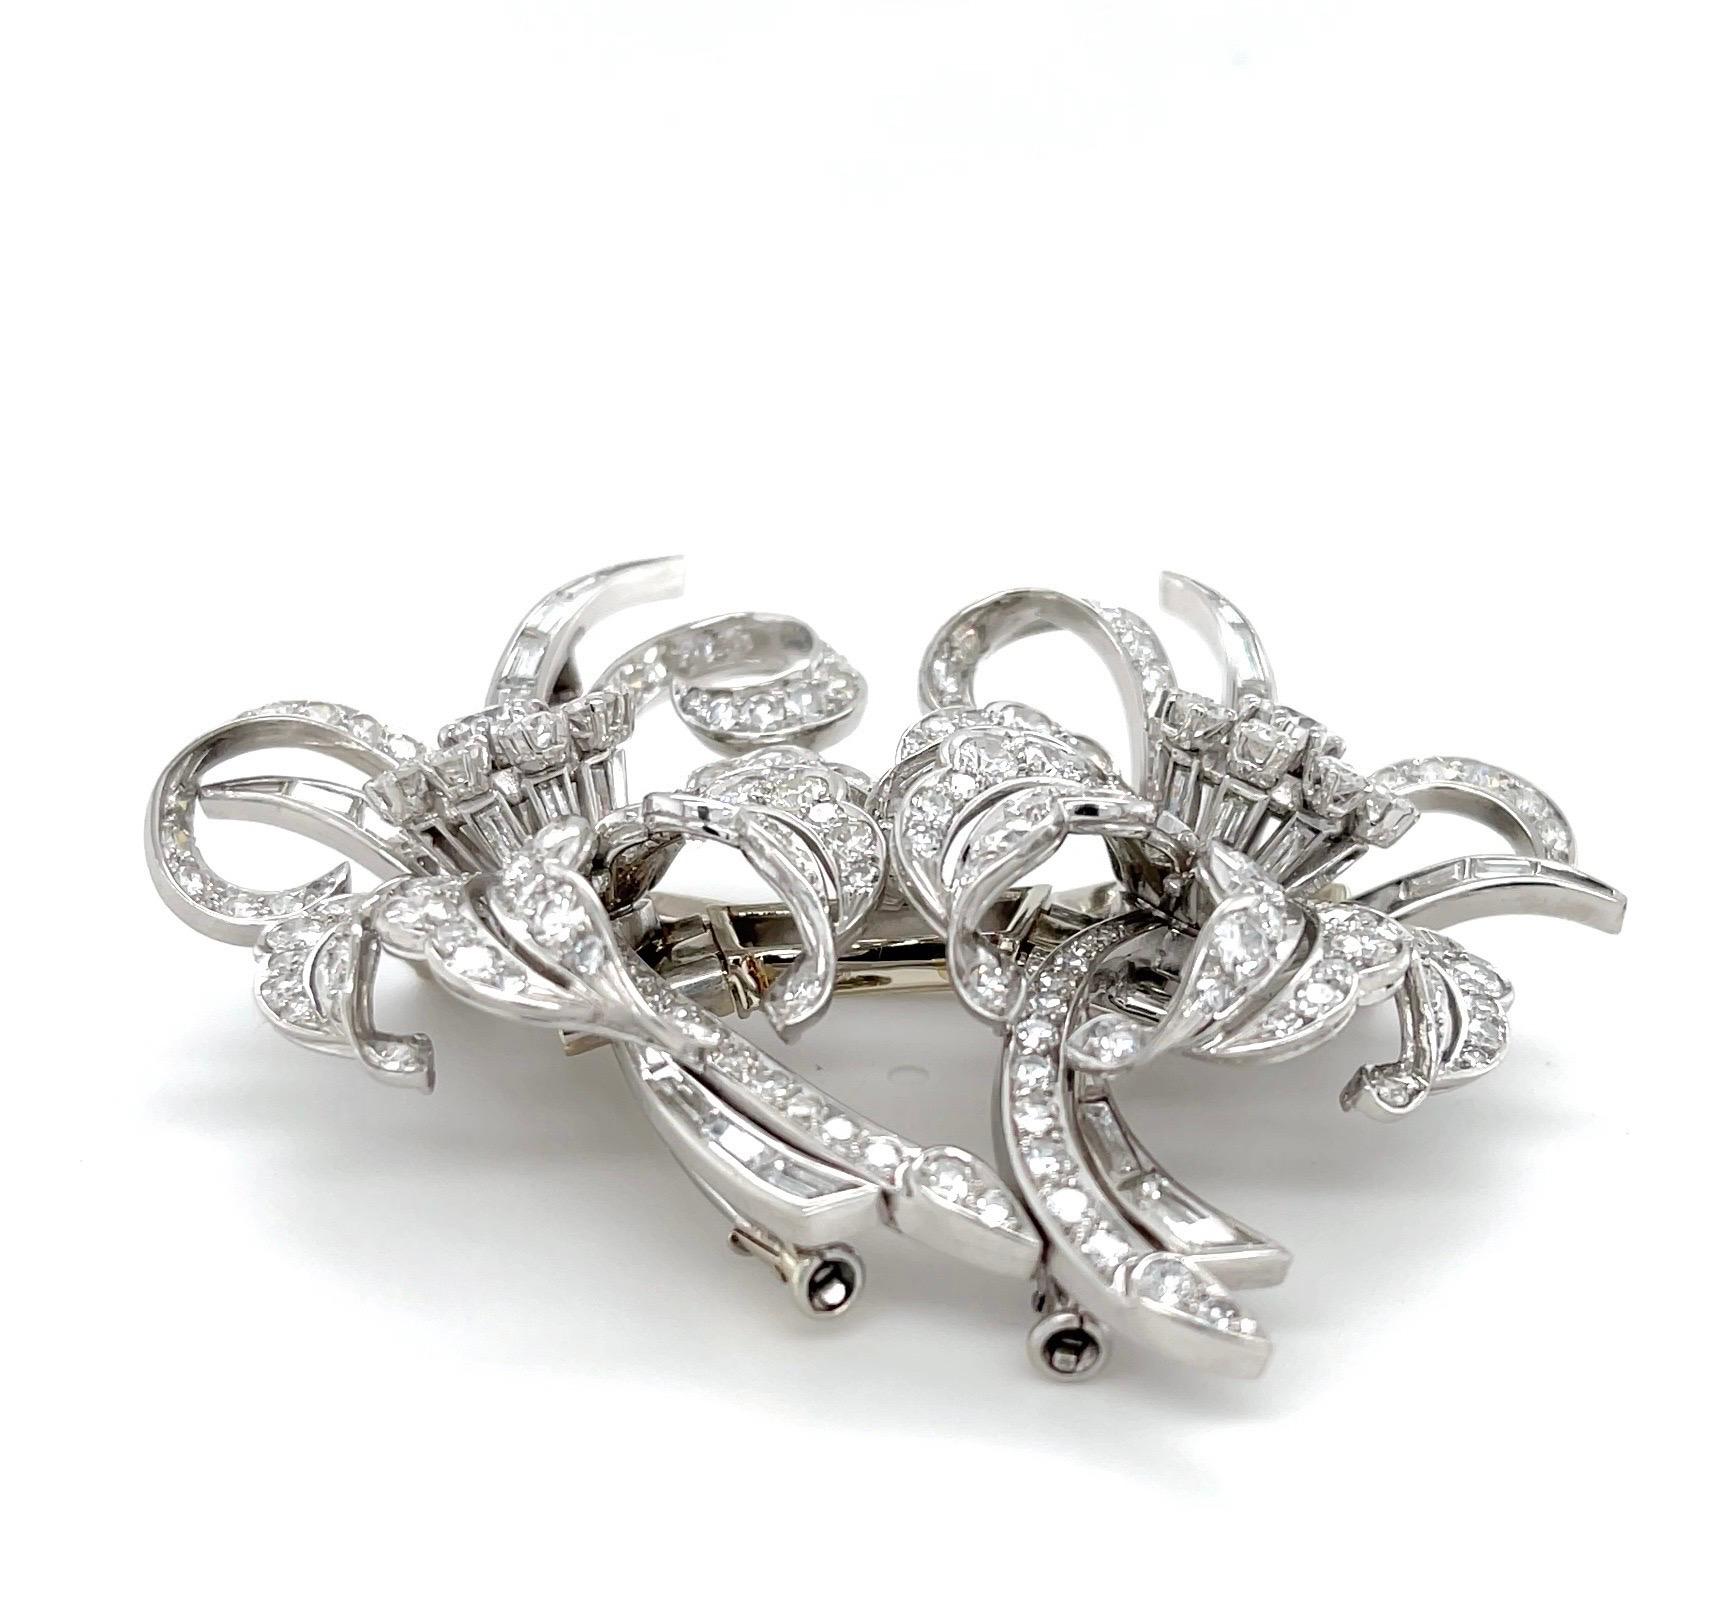 Magnificent French Hand Made Platinum & Diamond Brooch For Sale 2